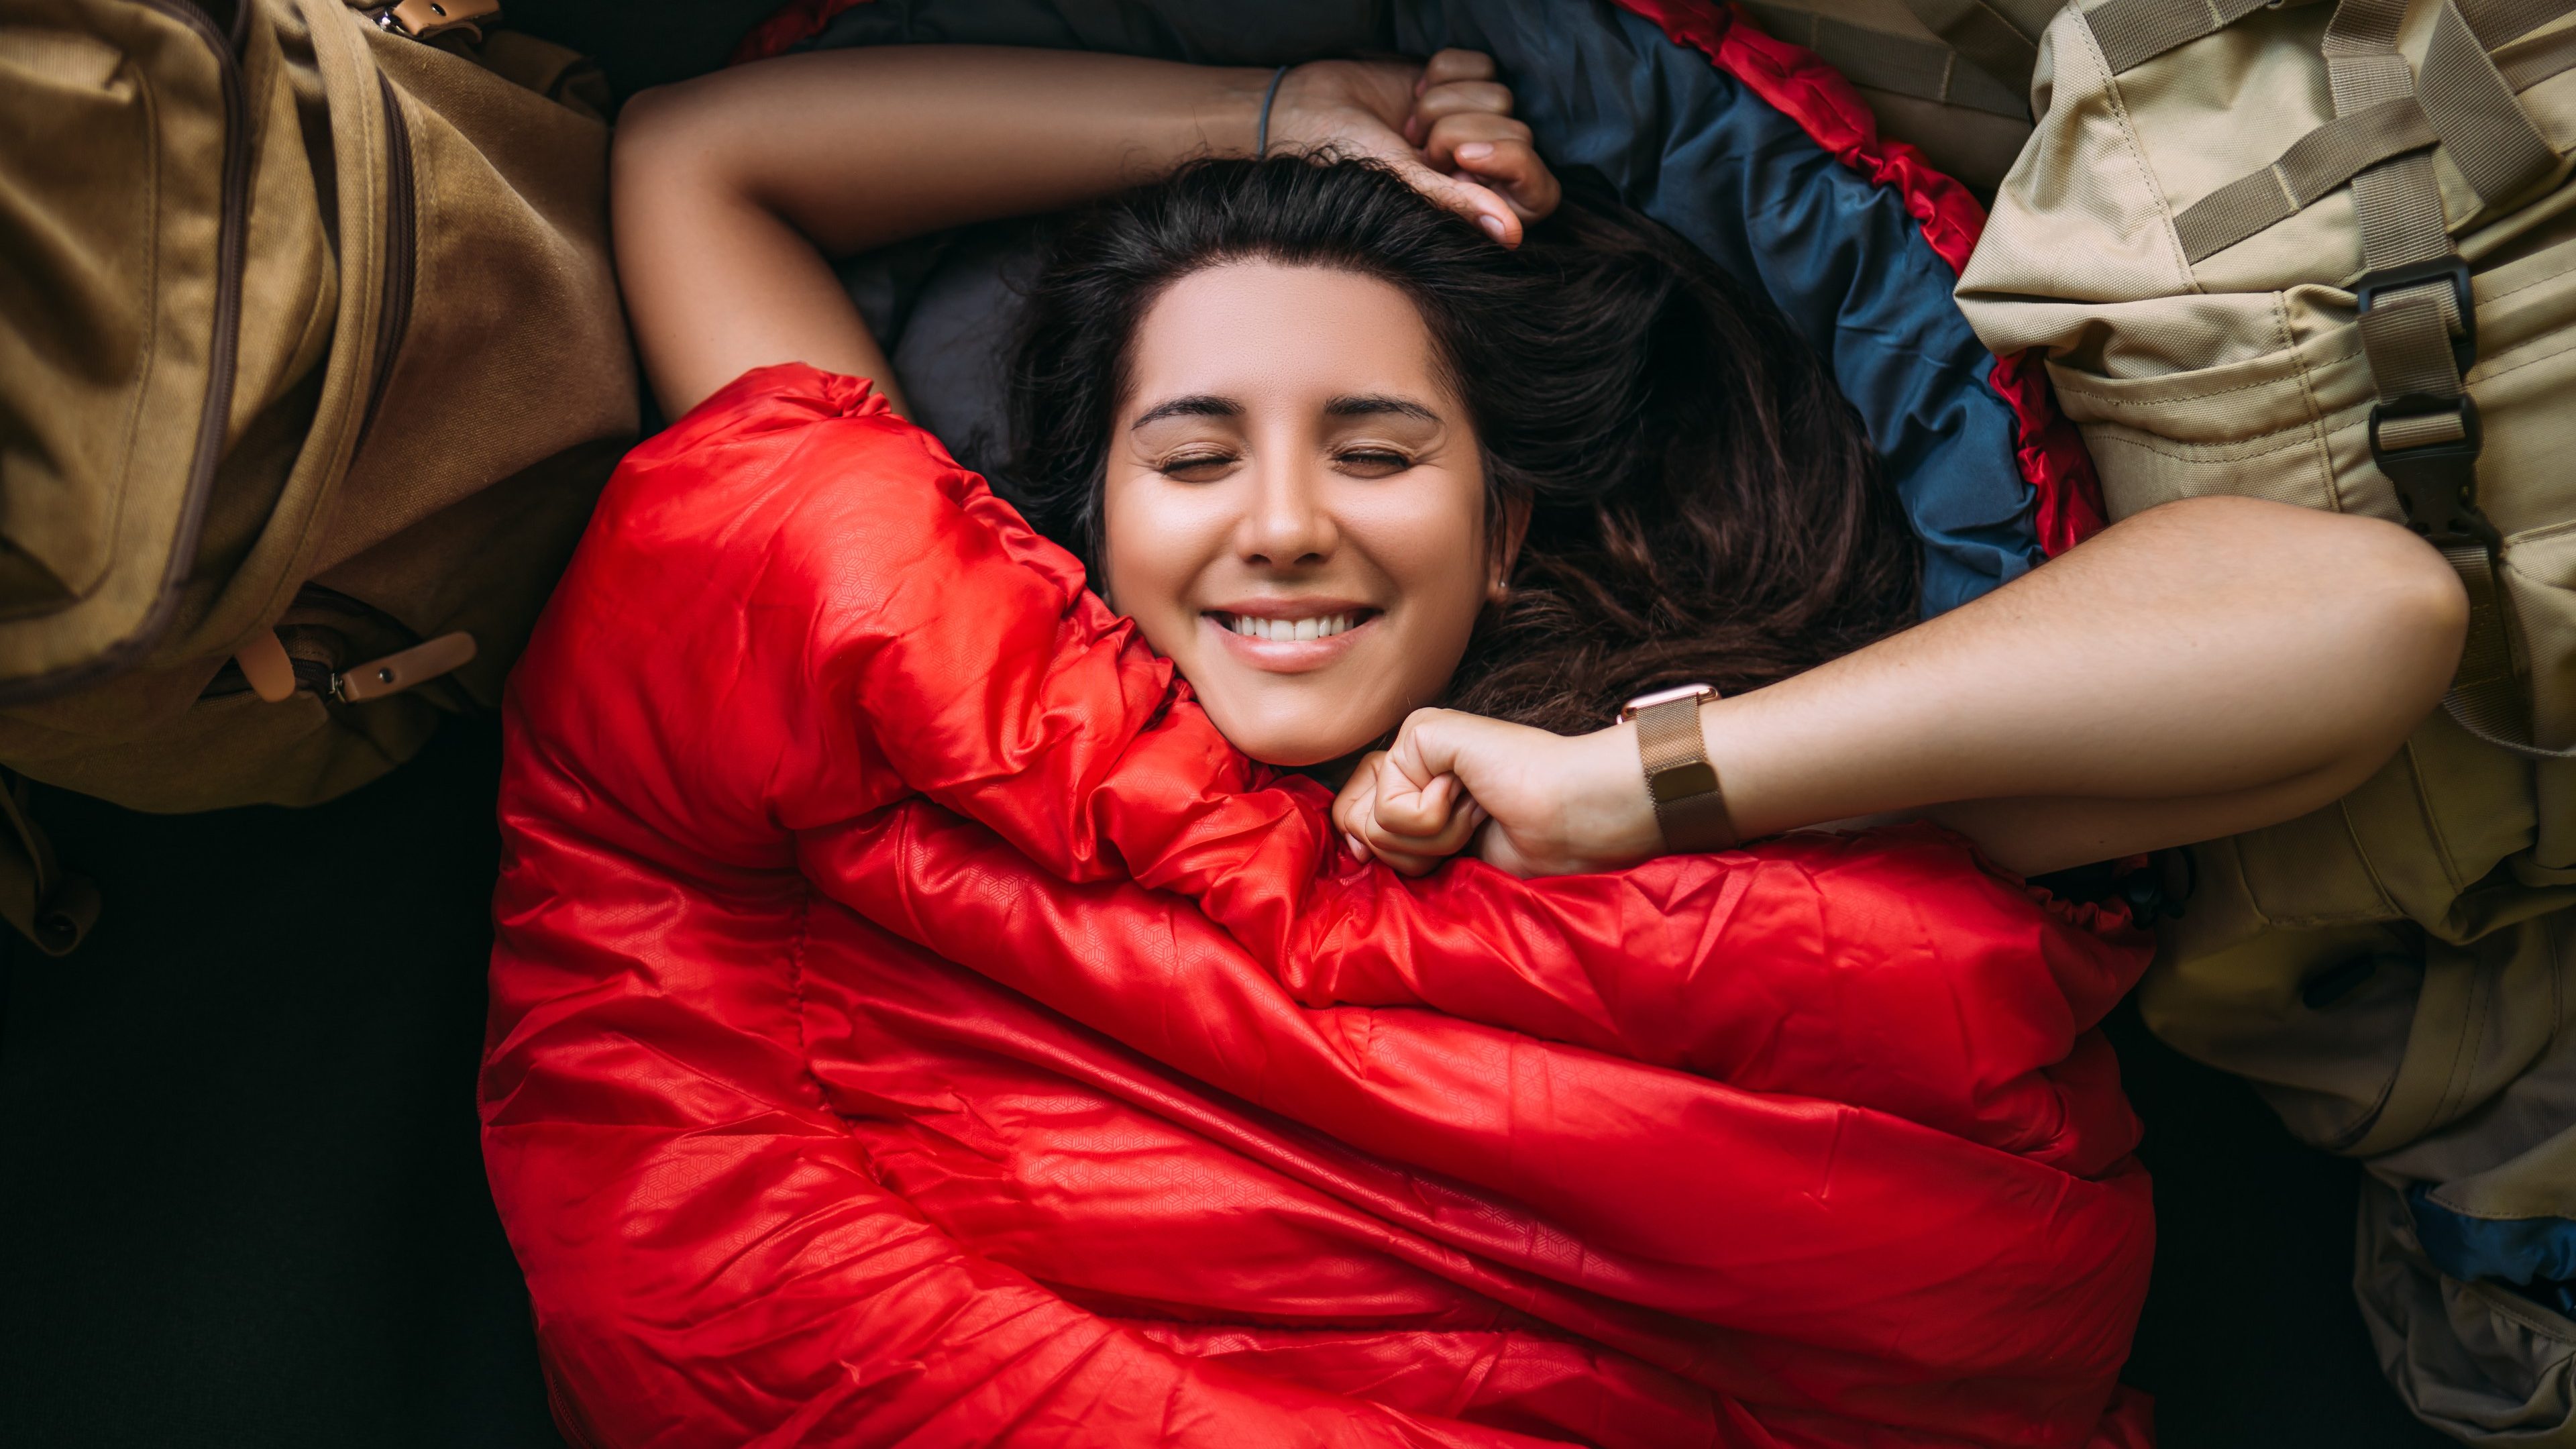 The traveler is resting in a sleeping bag. Rest concept. A tourist is resting in a tent. Woman relaxing in sleeping bag. Travel, camping concept, adventure. Happy smiling female traveler. The Traveler